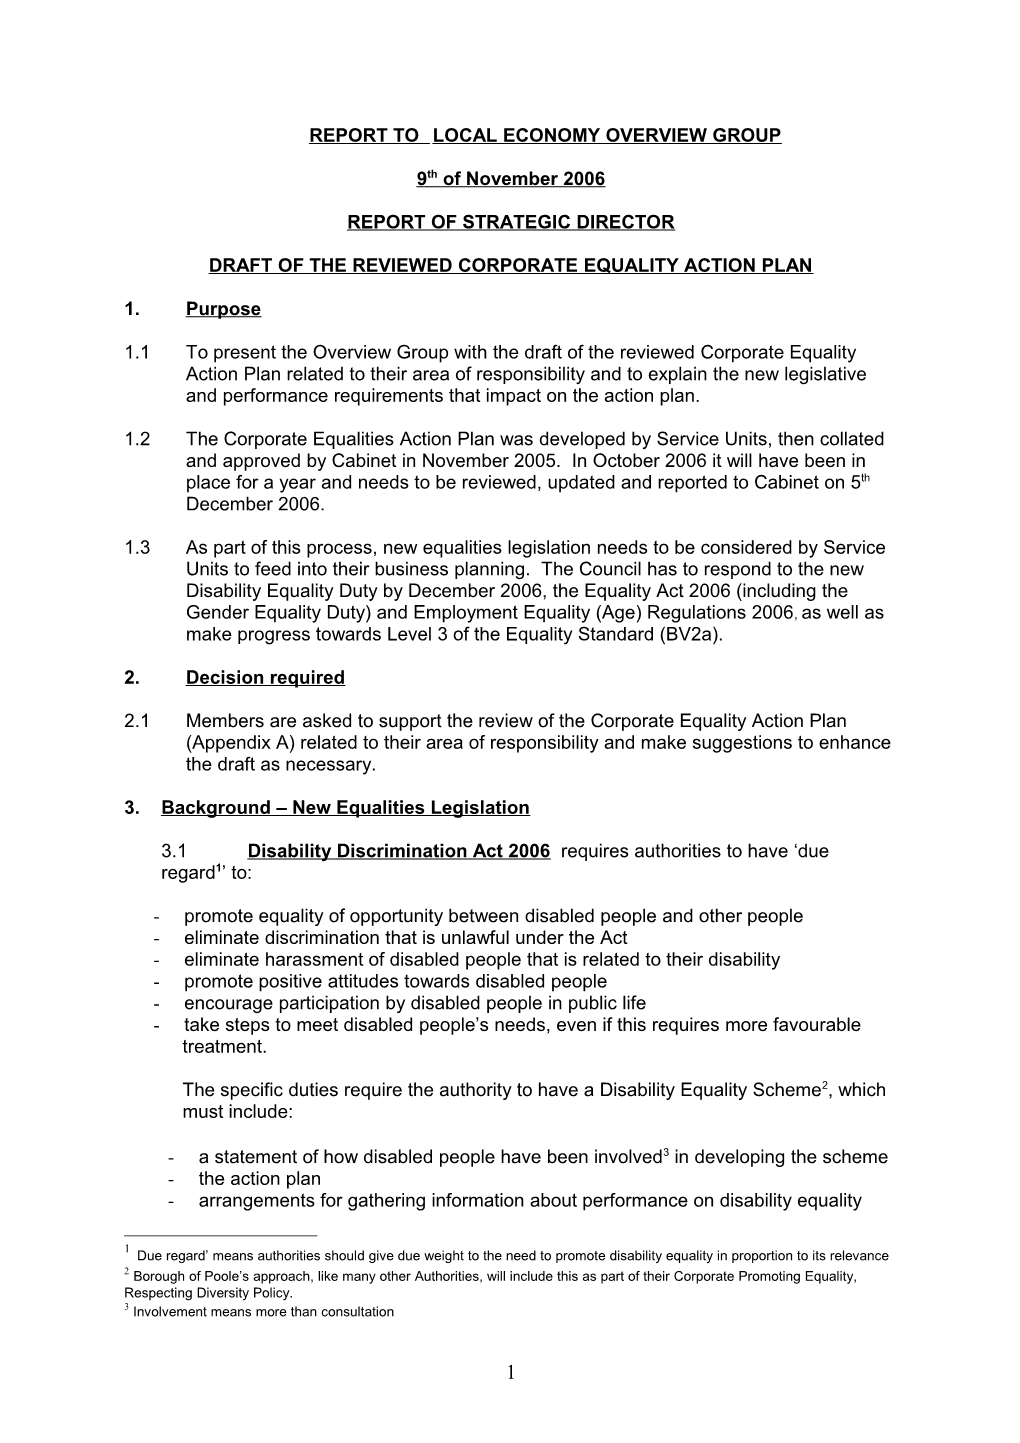 Draft of the Reviewed Corporate Equality Action Plan